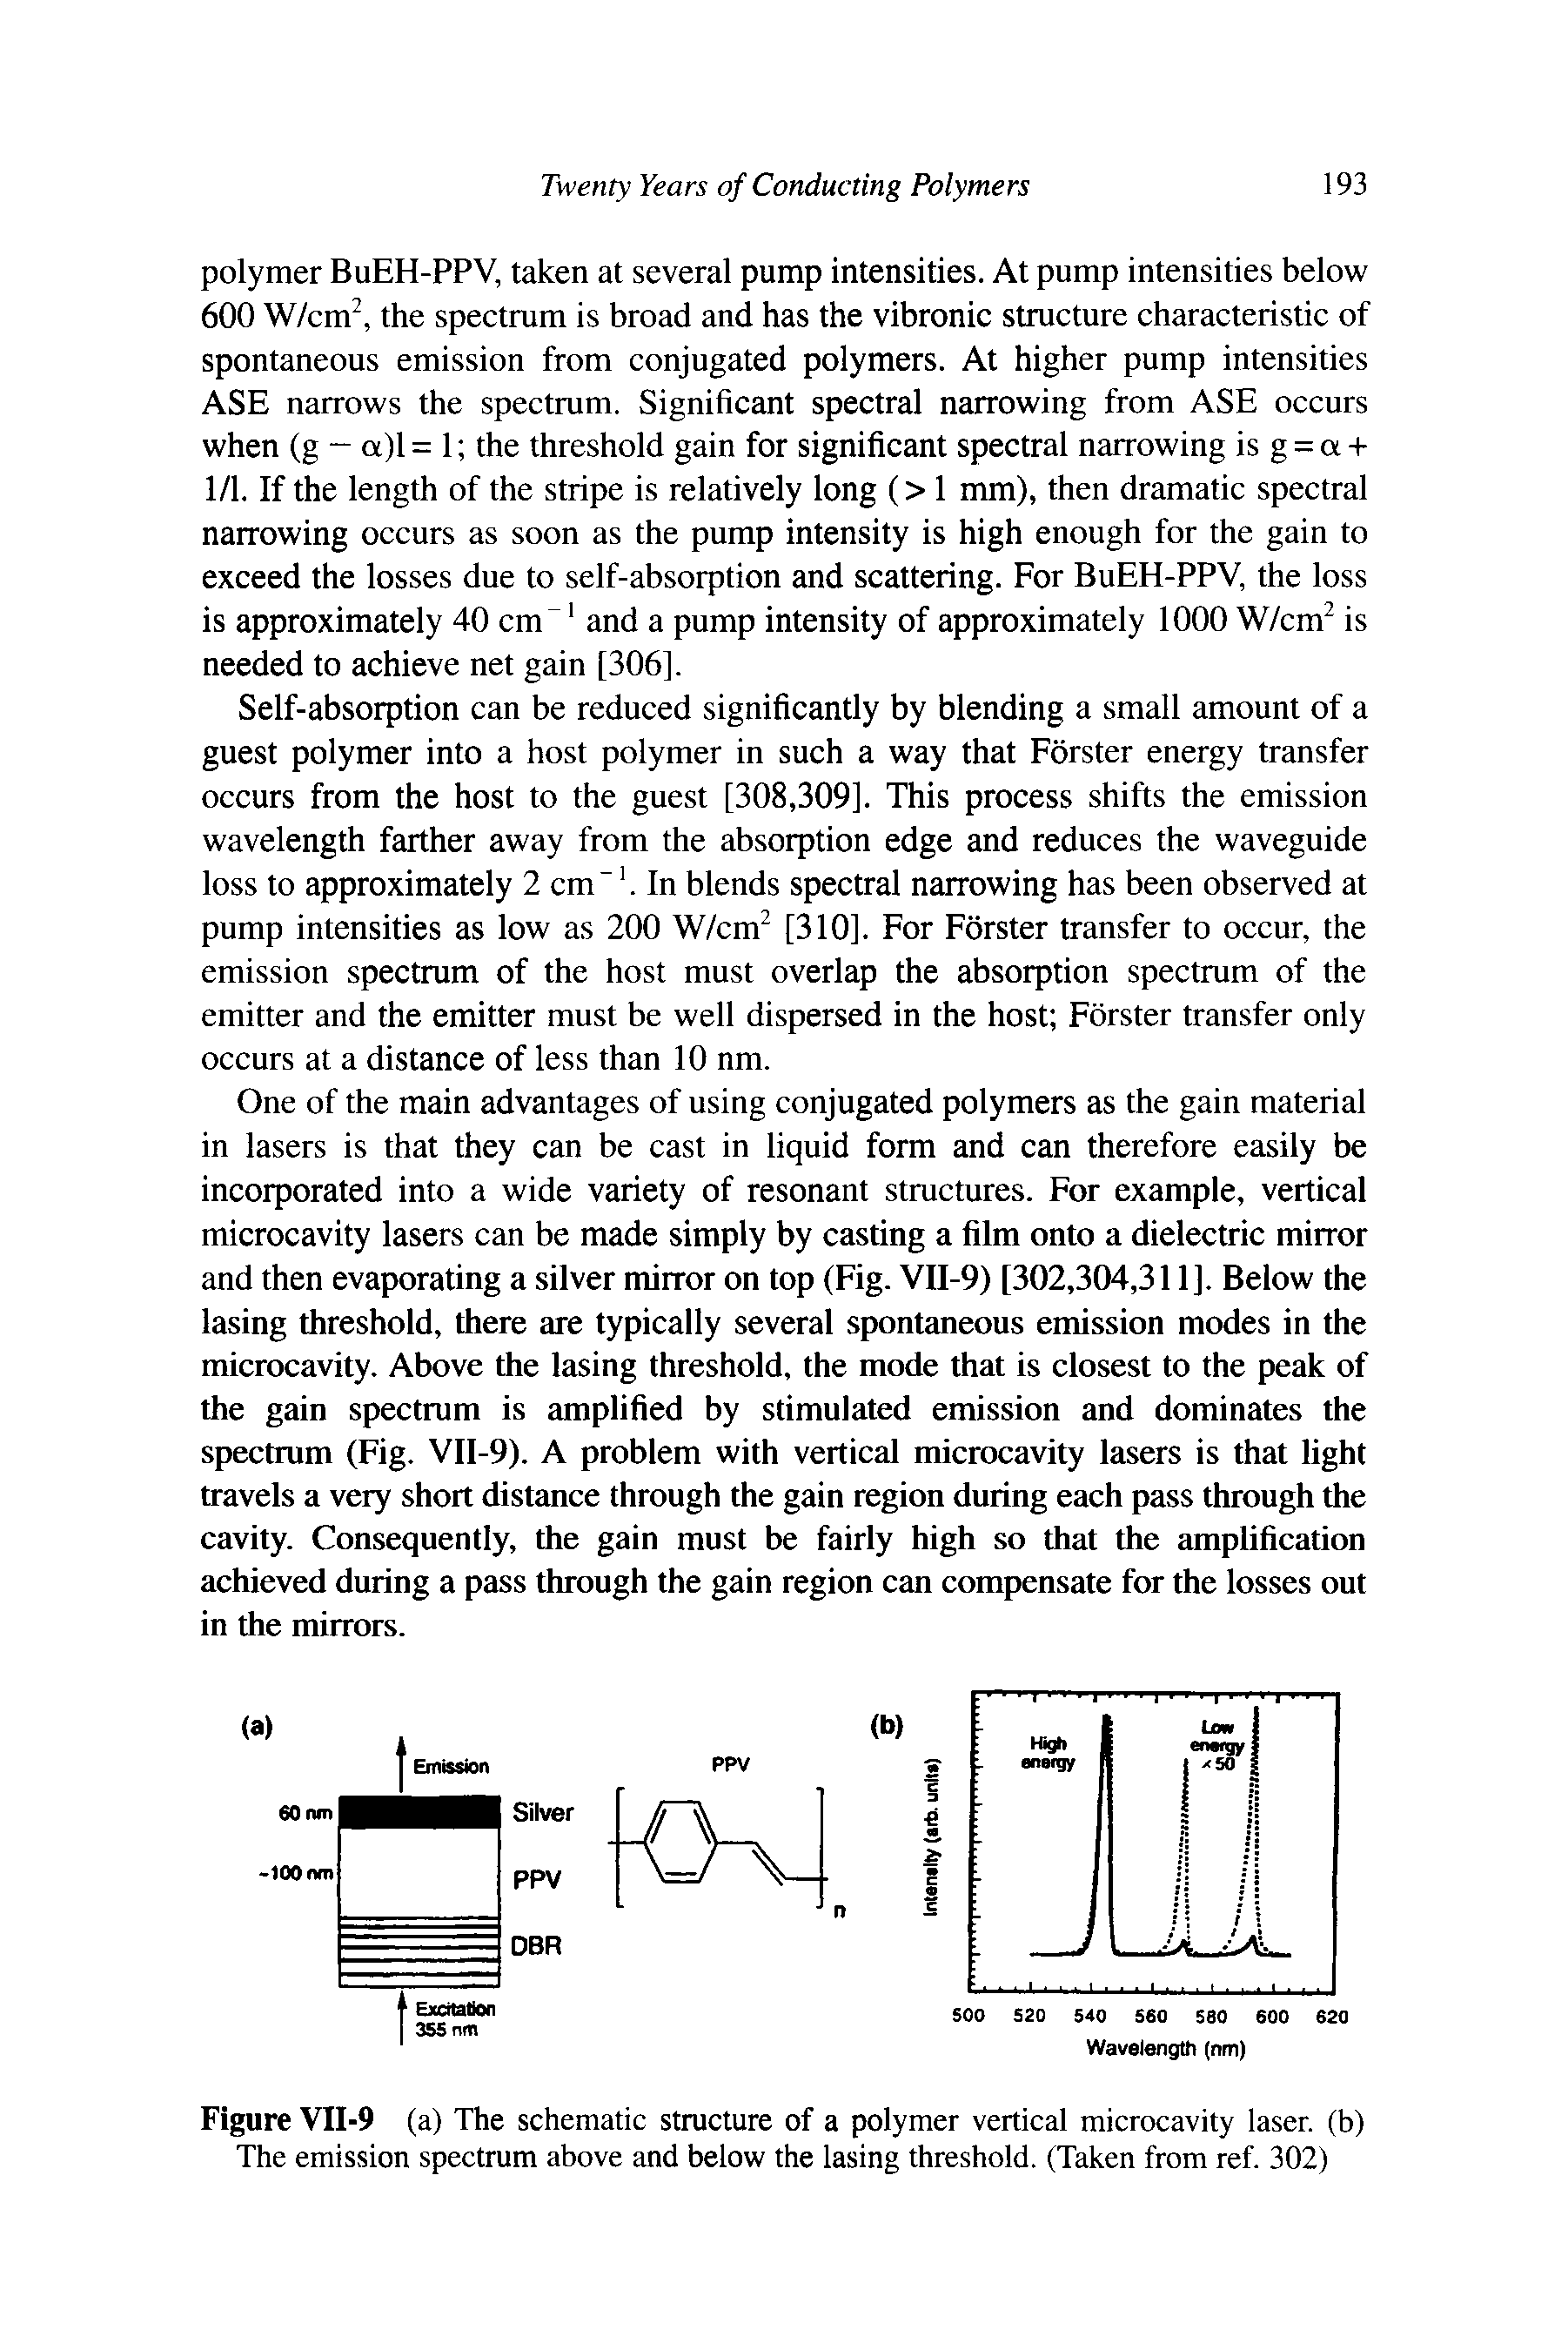 Figure VII-9 (a) The schematic structure of a polymer vertical microcavity laser, (b) The emission spectrum above and below the lasing threshold. (Taken from ref. 302)...